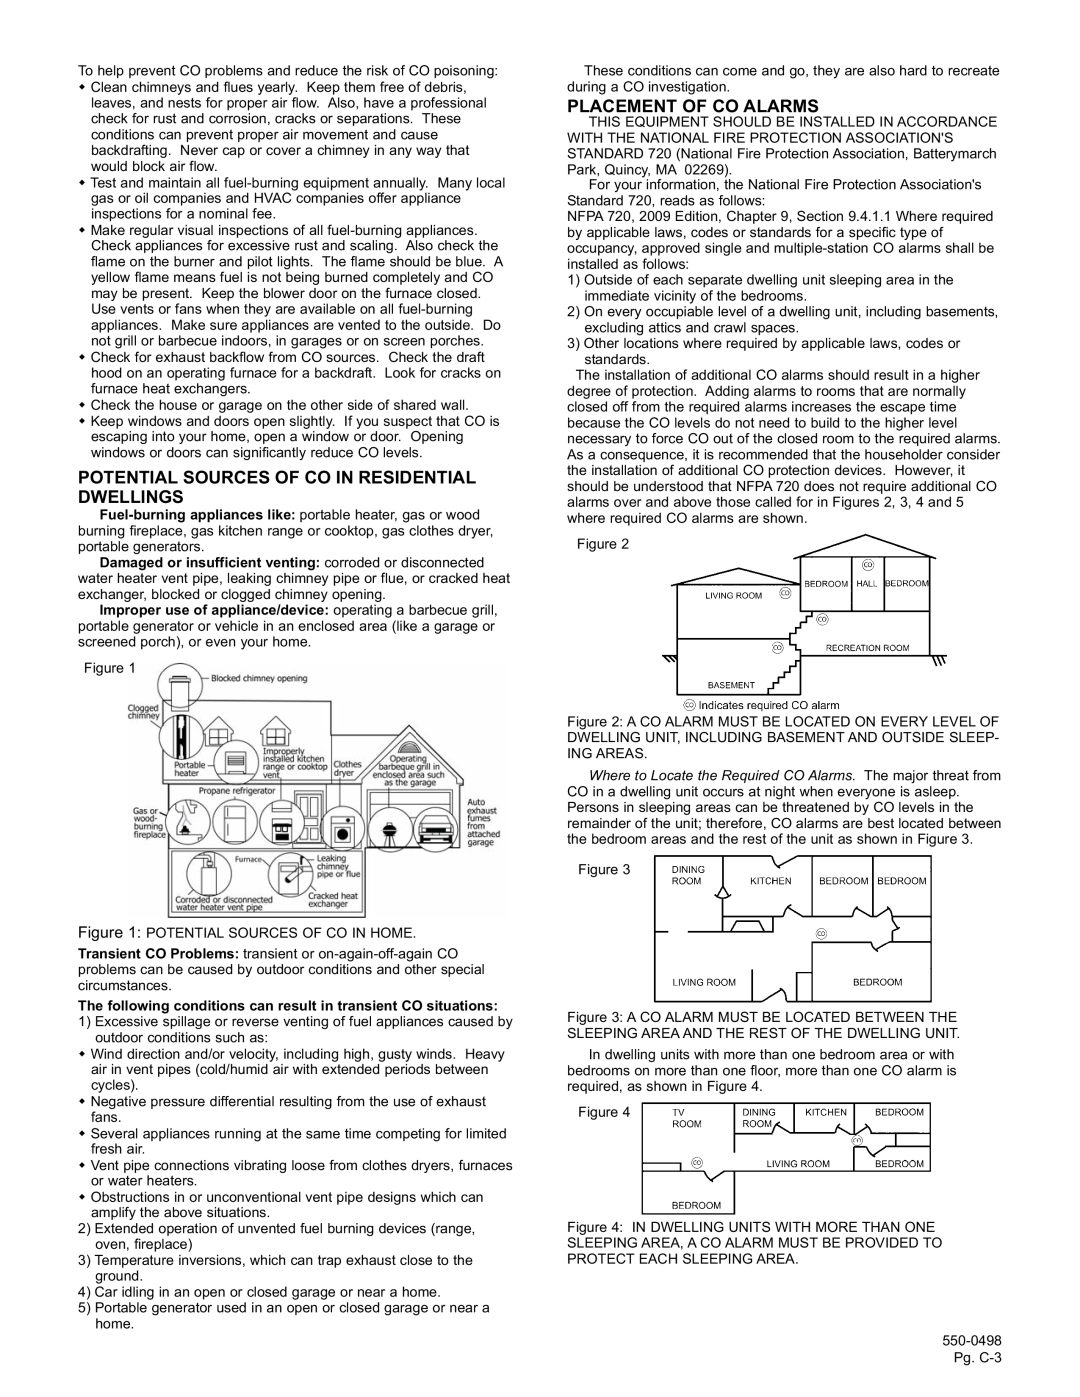 Gentek CO1209 installation instructions Potential Sources Of Co In Residential Dwellings, Placement Of Co Alarms 